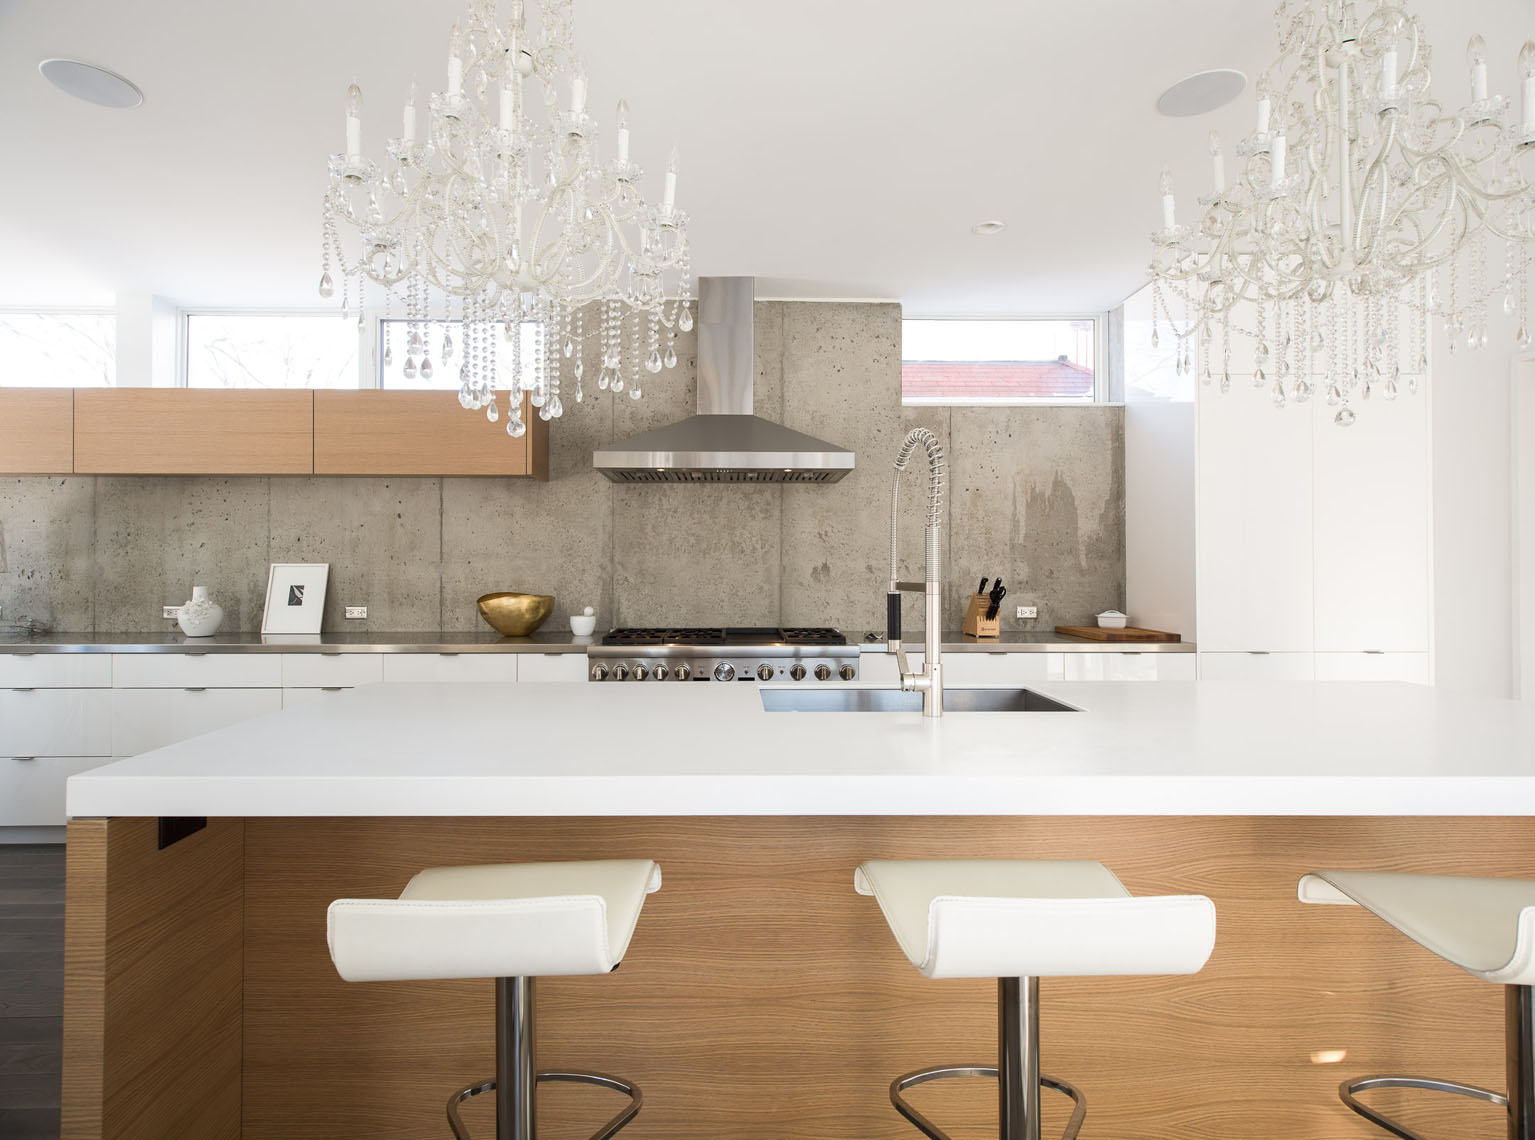 Modern kitchen with mixed white and wood cabinetry and exposed concrete walls